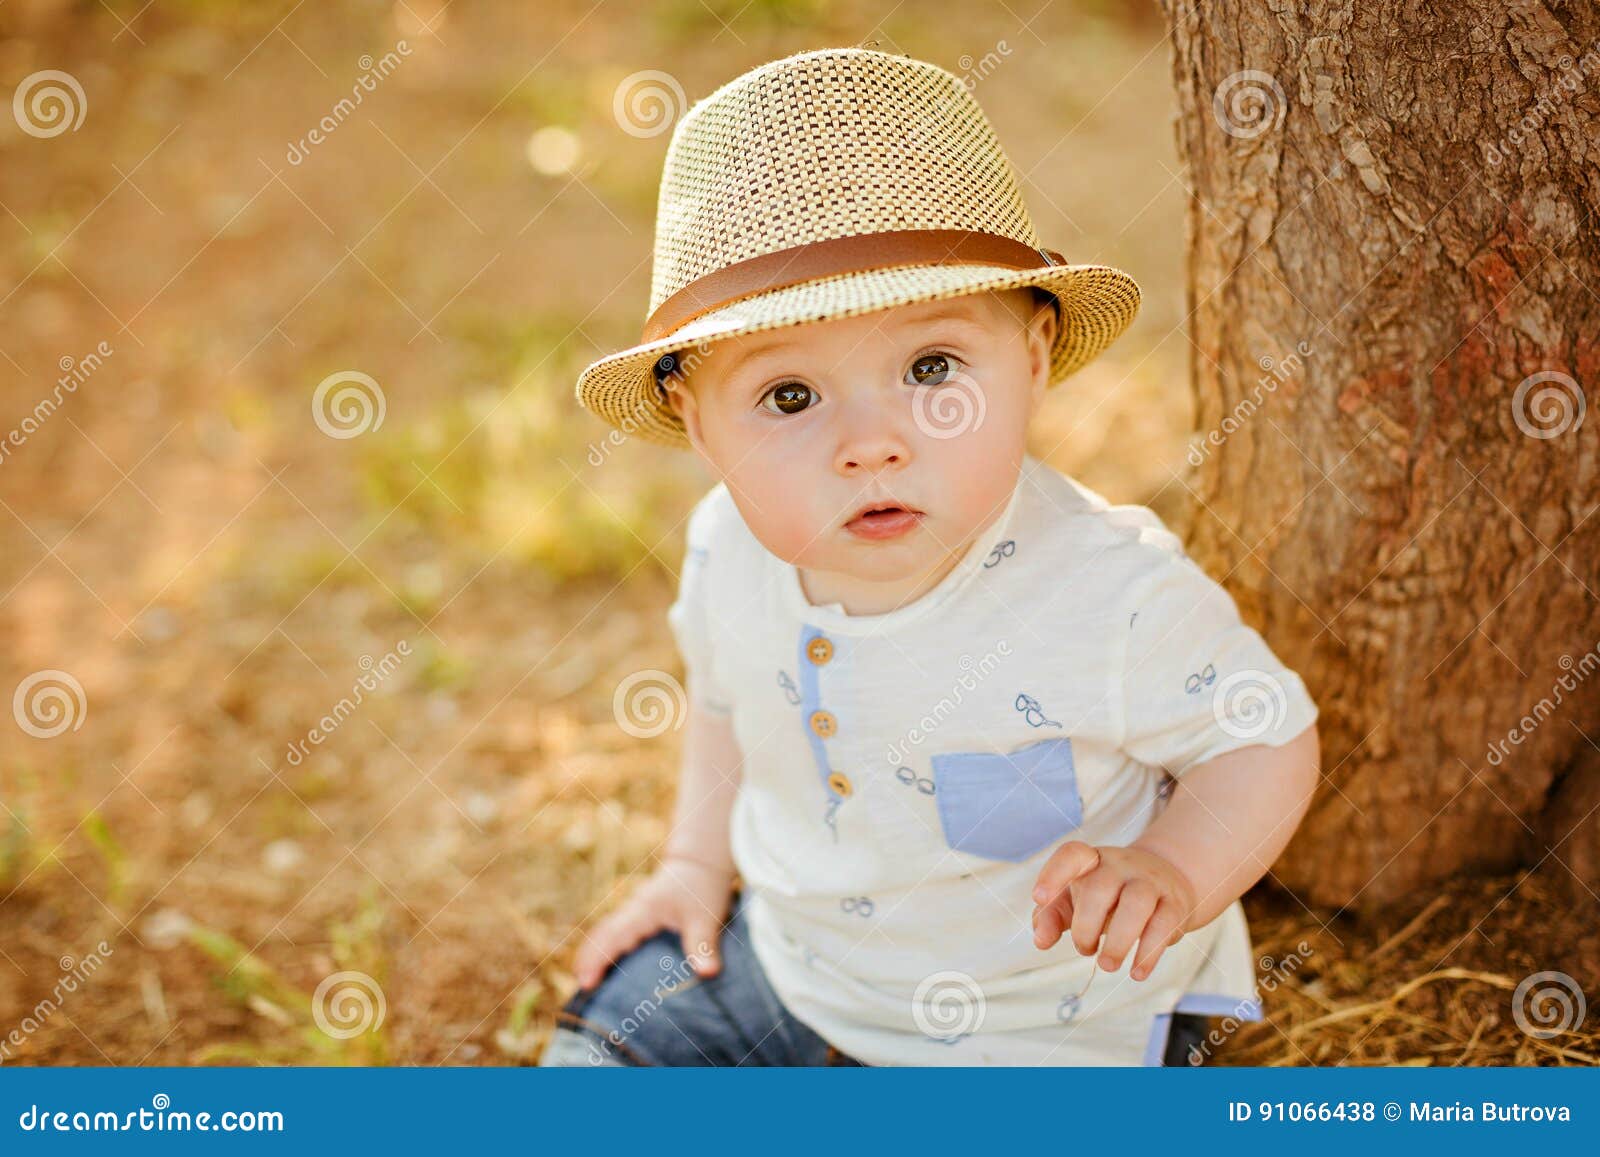 Small Charming and Very Beautiful Baby Boy with Big Brown Eyes I ...